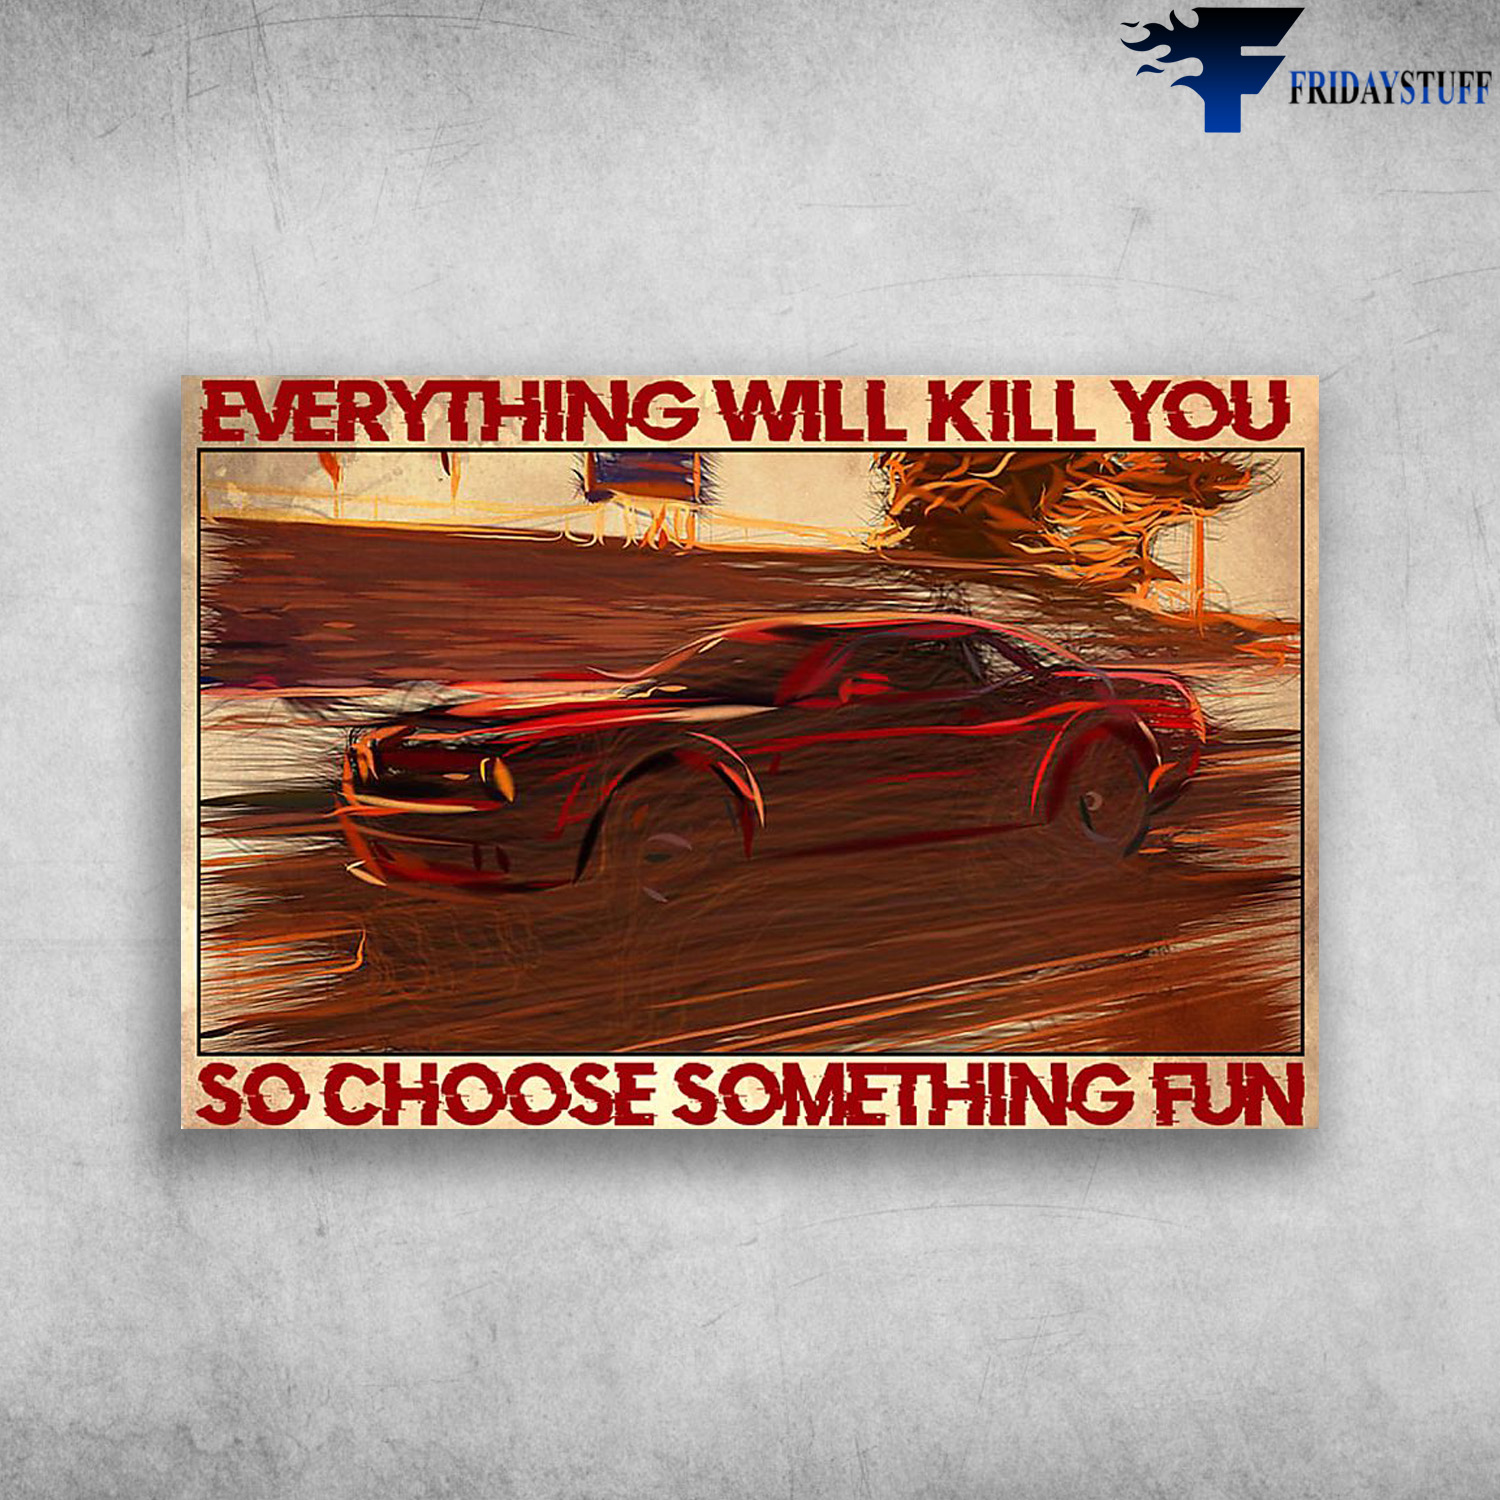 Dodge Challe - Everything WIll Kill You, So Choose Something Fun